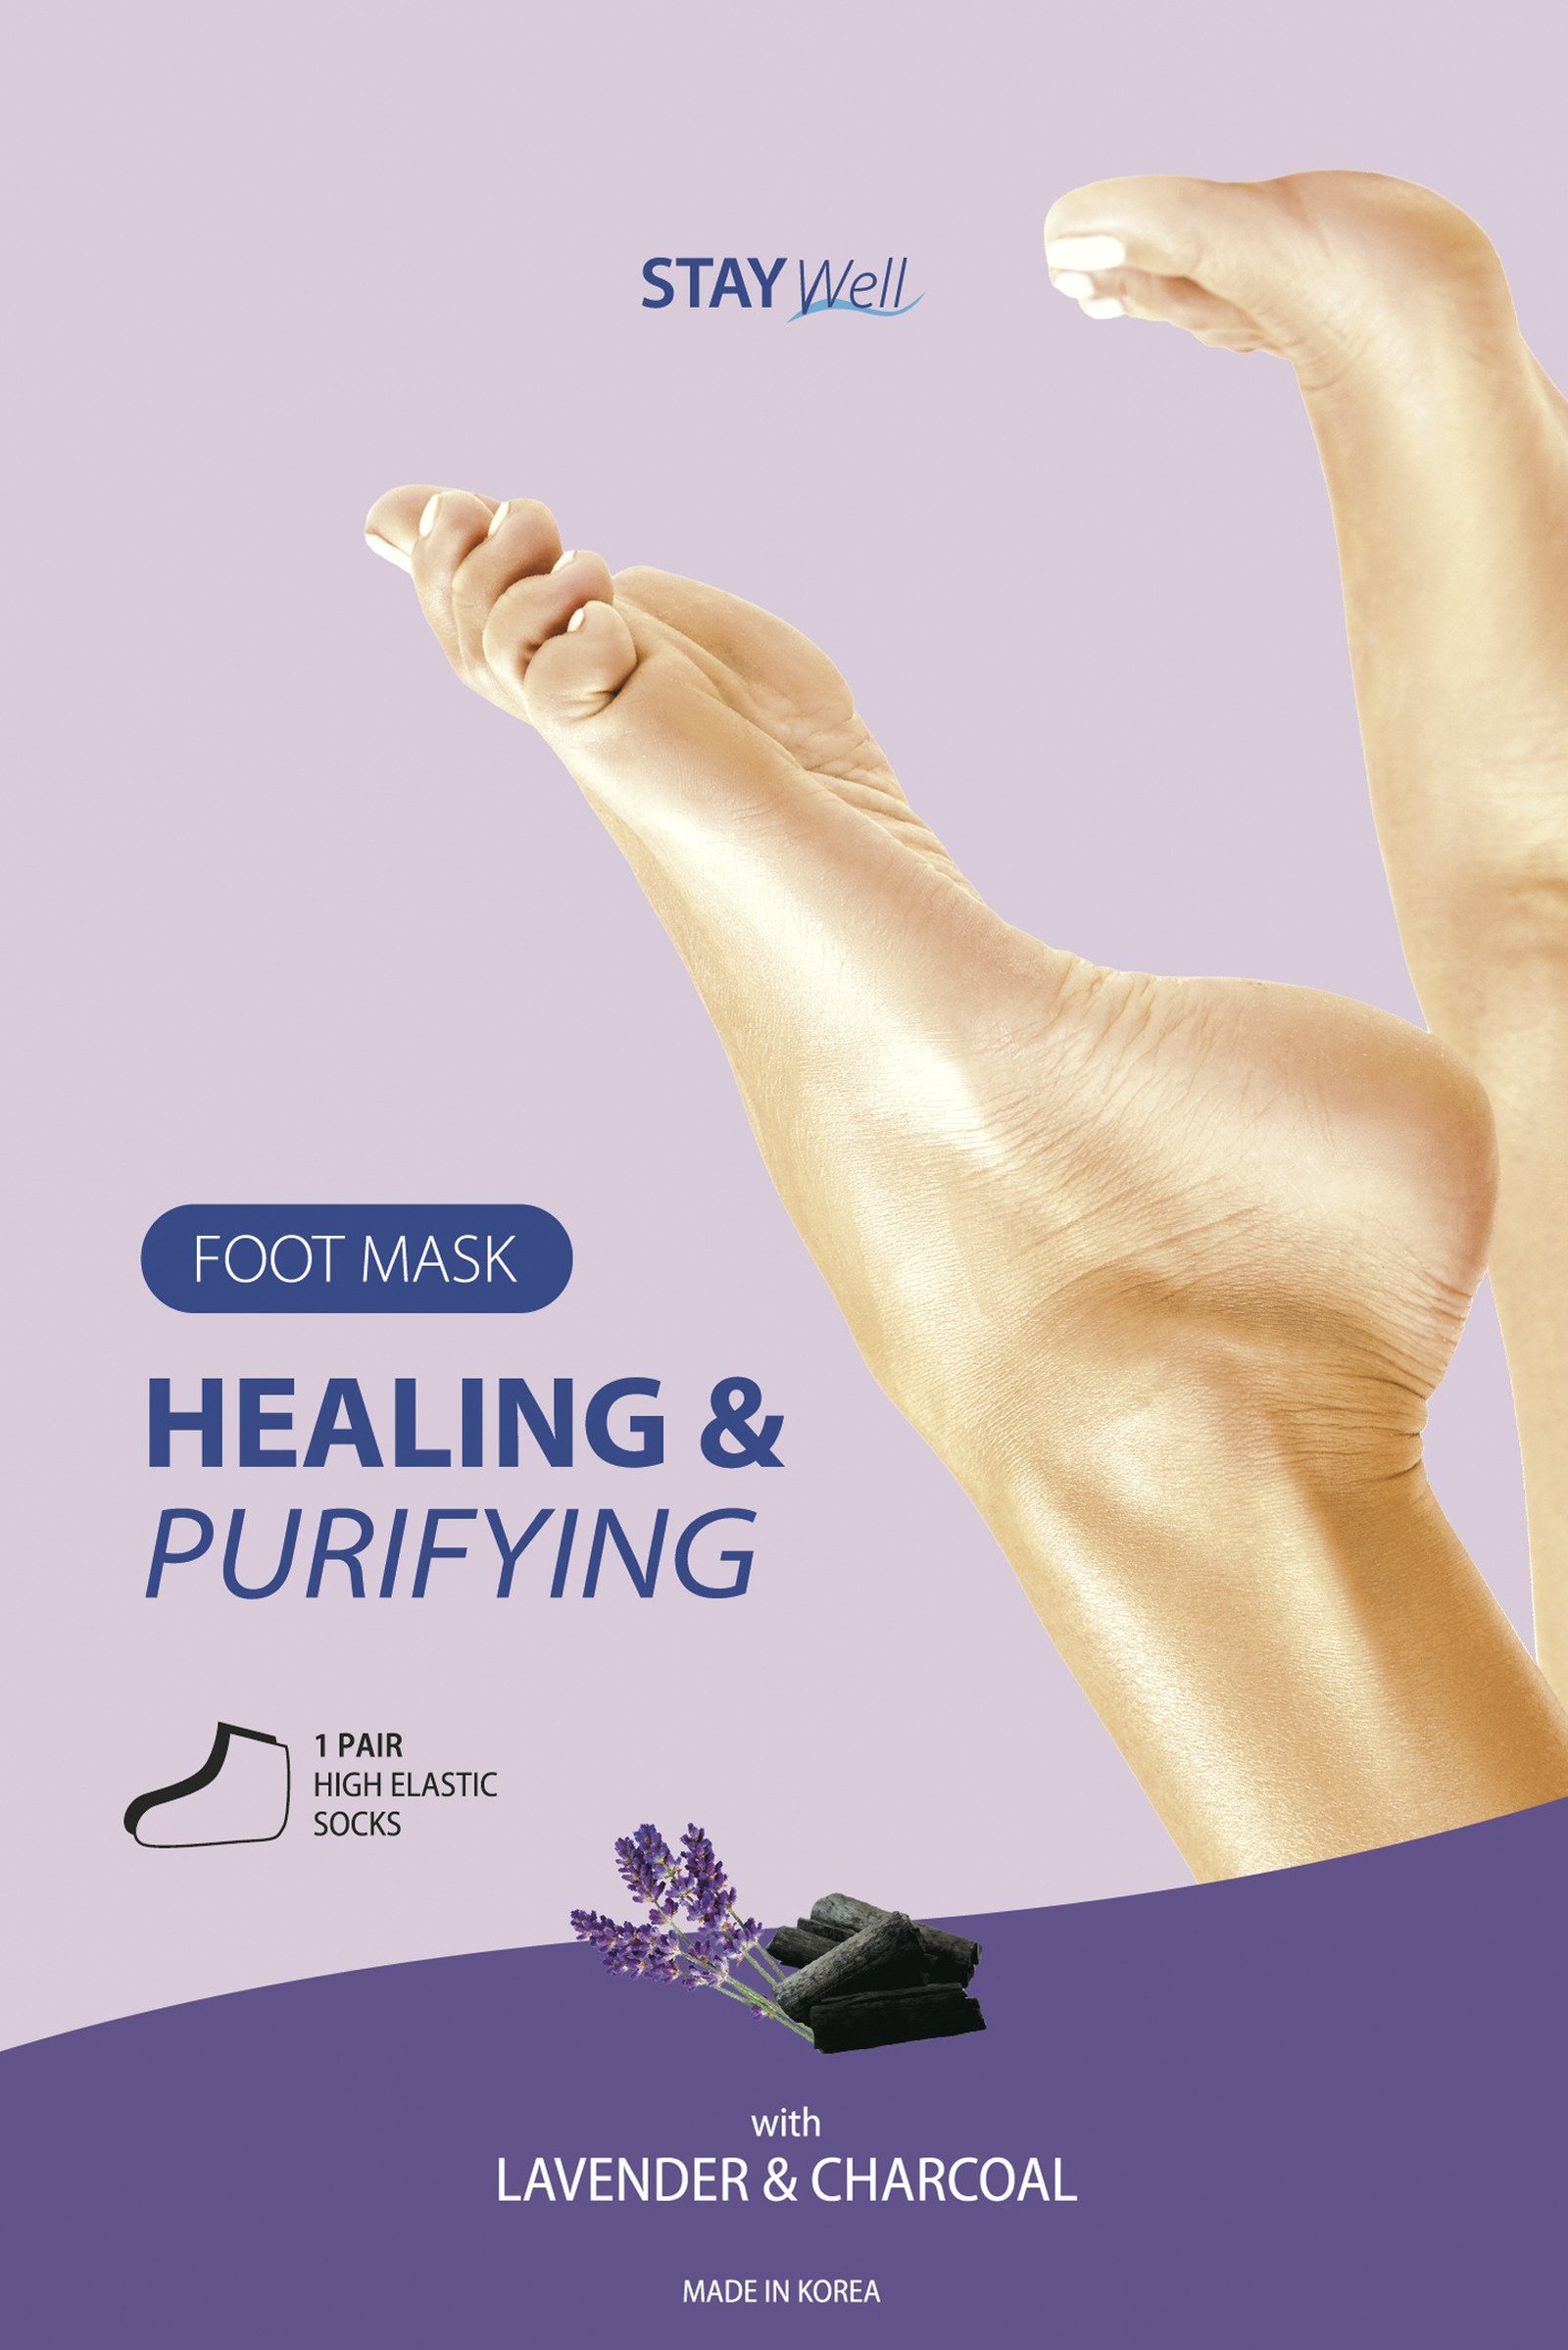 STAY WELL Healing & Purifying Foot Mask Lavender & Charcoal 34 g